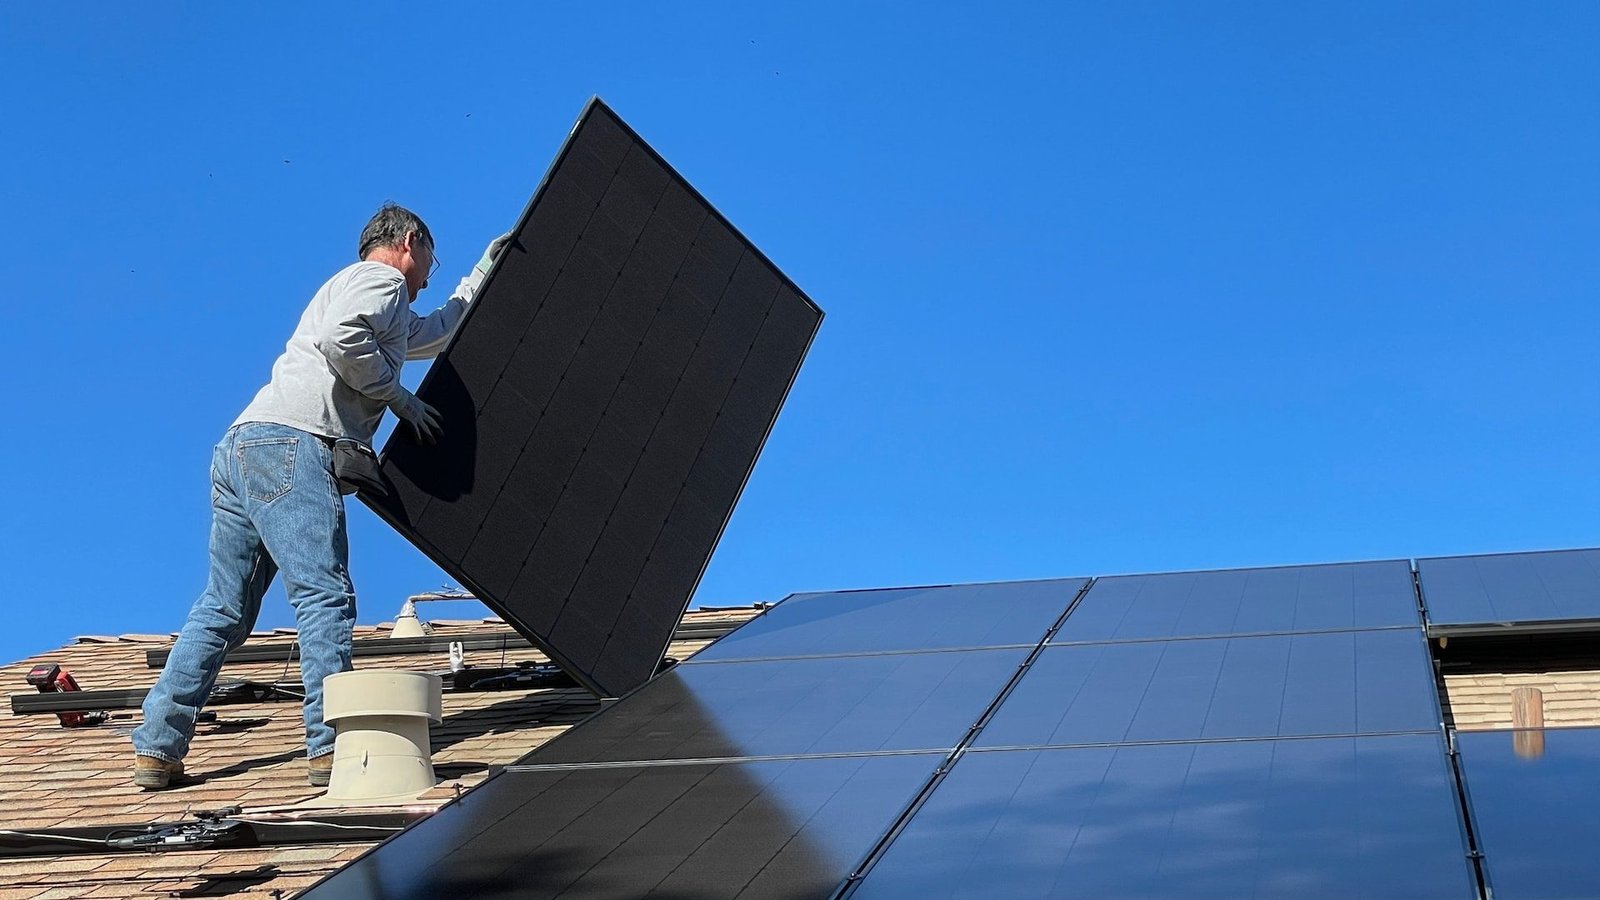 Man on roof installing solar panels on a sunny day